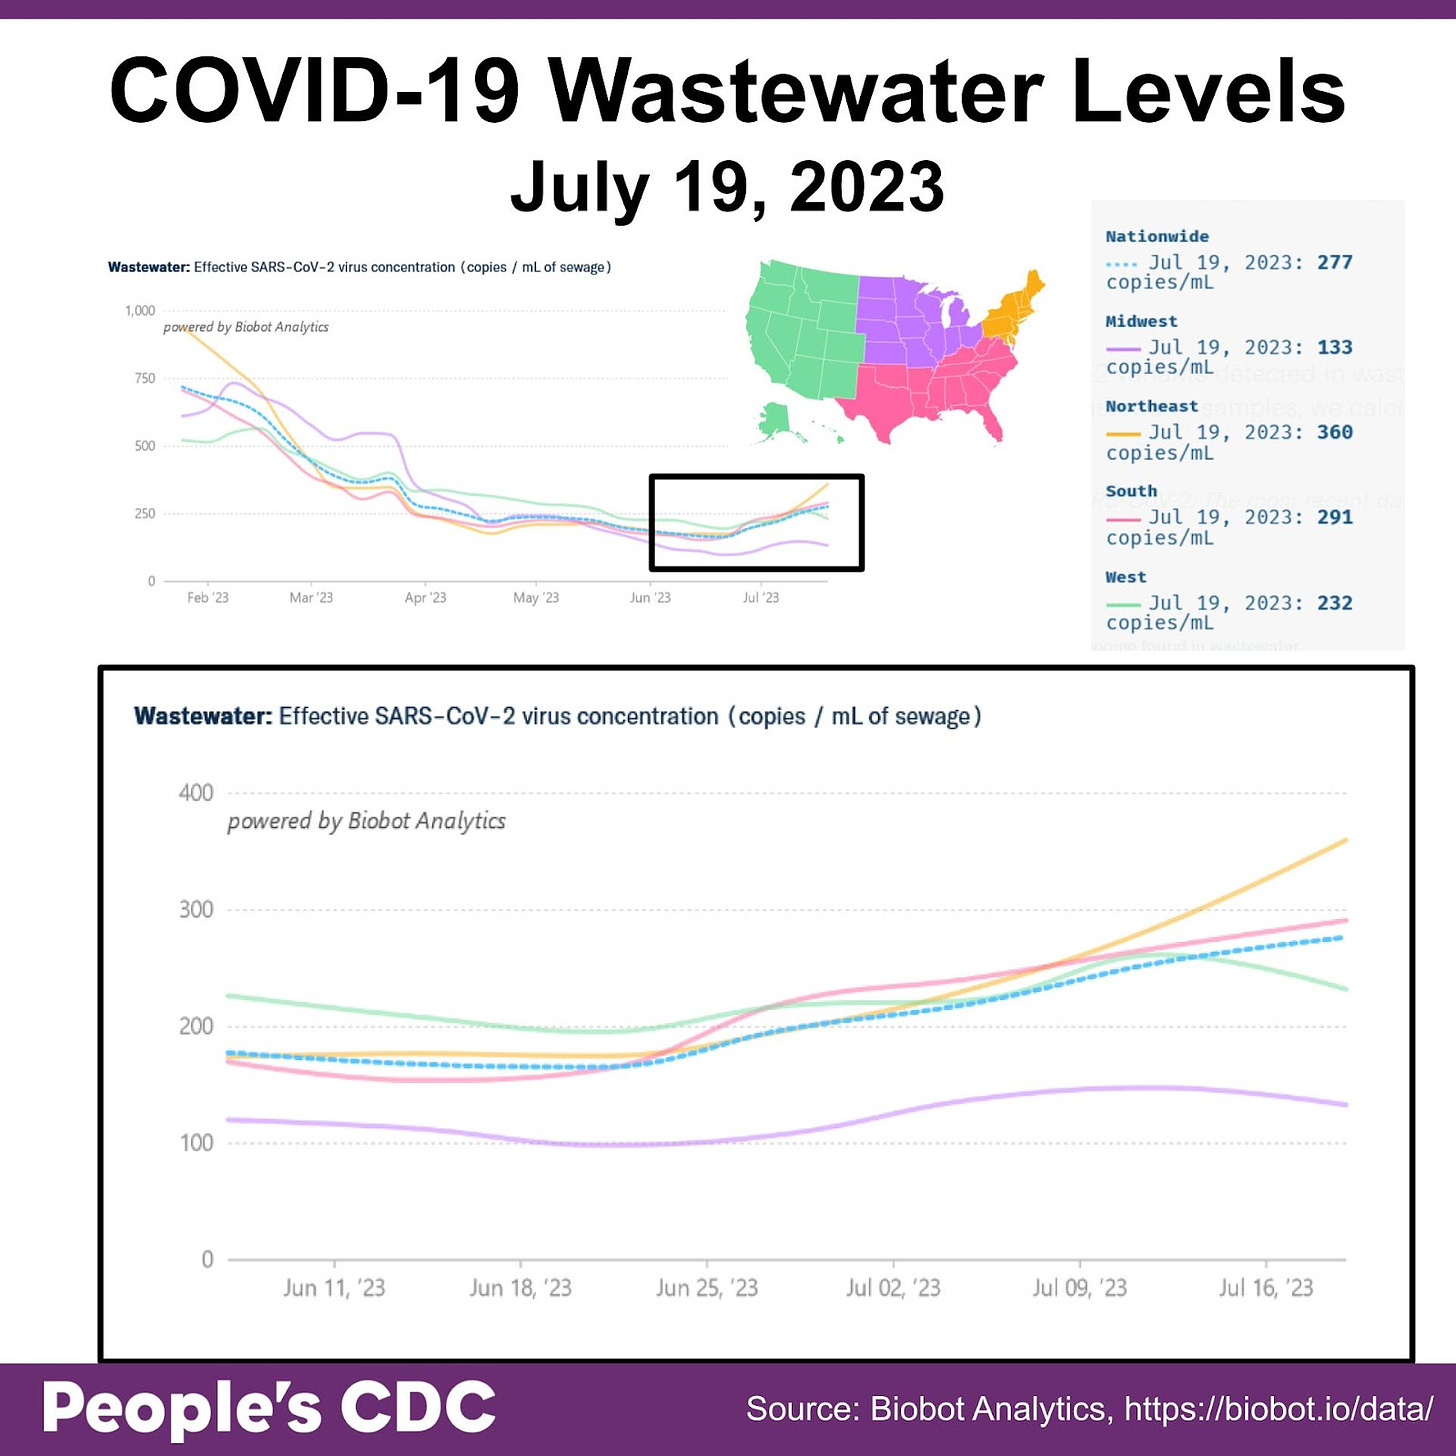  Title reads “COVID-19 Wastewater Levels July 19, 2023.” A map of the United States in the upper right corner serves as a key. The West is green, Midwest is purple, South is pink, and Northeast is orange. A graph on the bottom is titled “Wastewater: Effective SARS-CoV-2 virus concentration (copies / mL of sewage).” At the top, a line graph shows Feb 2023 through July 2023. The line graph at the bottom shows X-axis labels June 11, 2023 and July 16, 2023 with regional virus concentrations showing an increase nationally, in the Northeast, and in the Southeast. Midwest and West virus concentrations have been roughly plateaued. A key on the upper right states concentration as of July 19, 2023: 277 copies / mL (National), 133 copies / mL (Midwest), 360 copies / mL (Northeast), 291 copies / mL (Southeast), and 232 copies / mL (West).